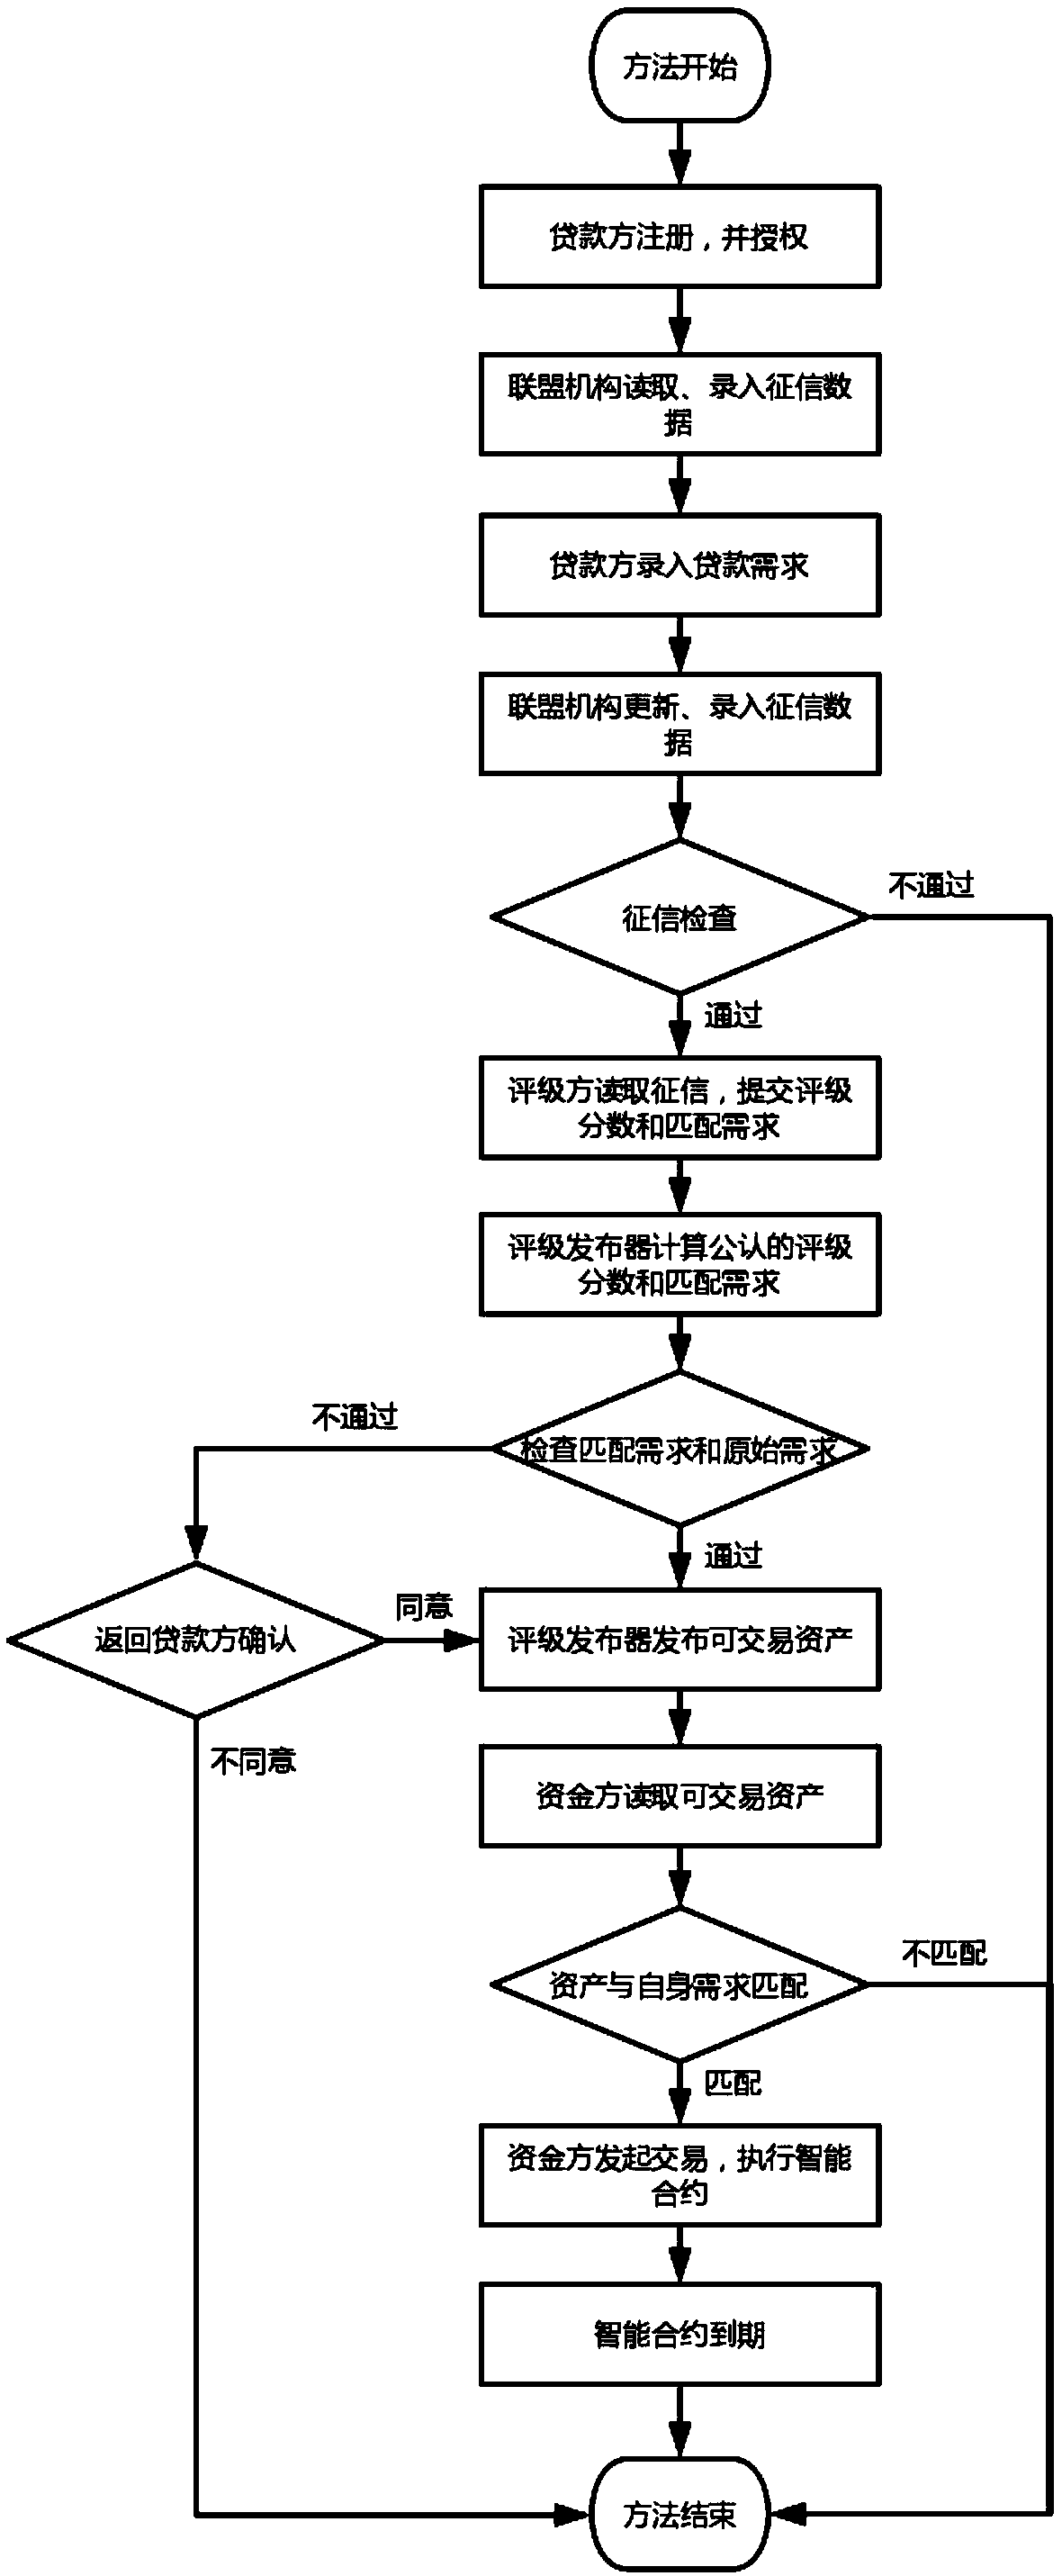 Small micro-loan transaction system and transaction method based on alliance chain